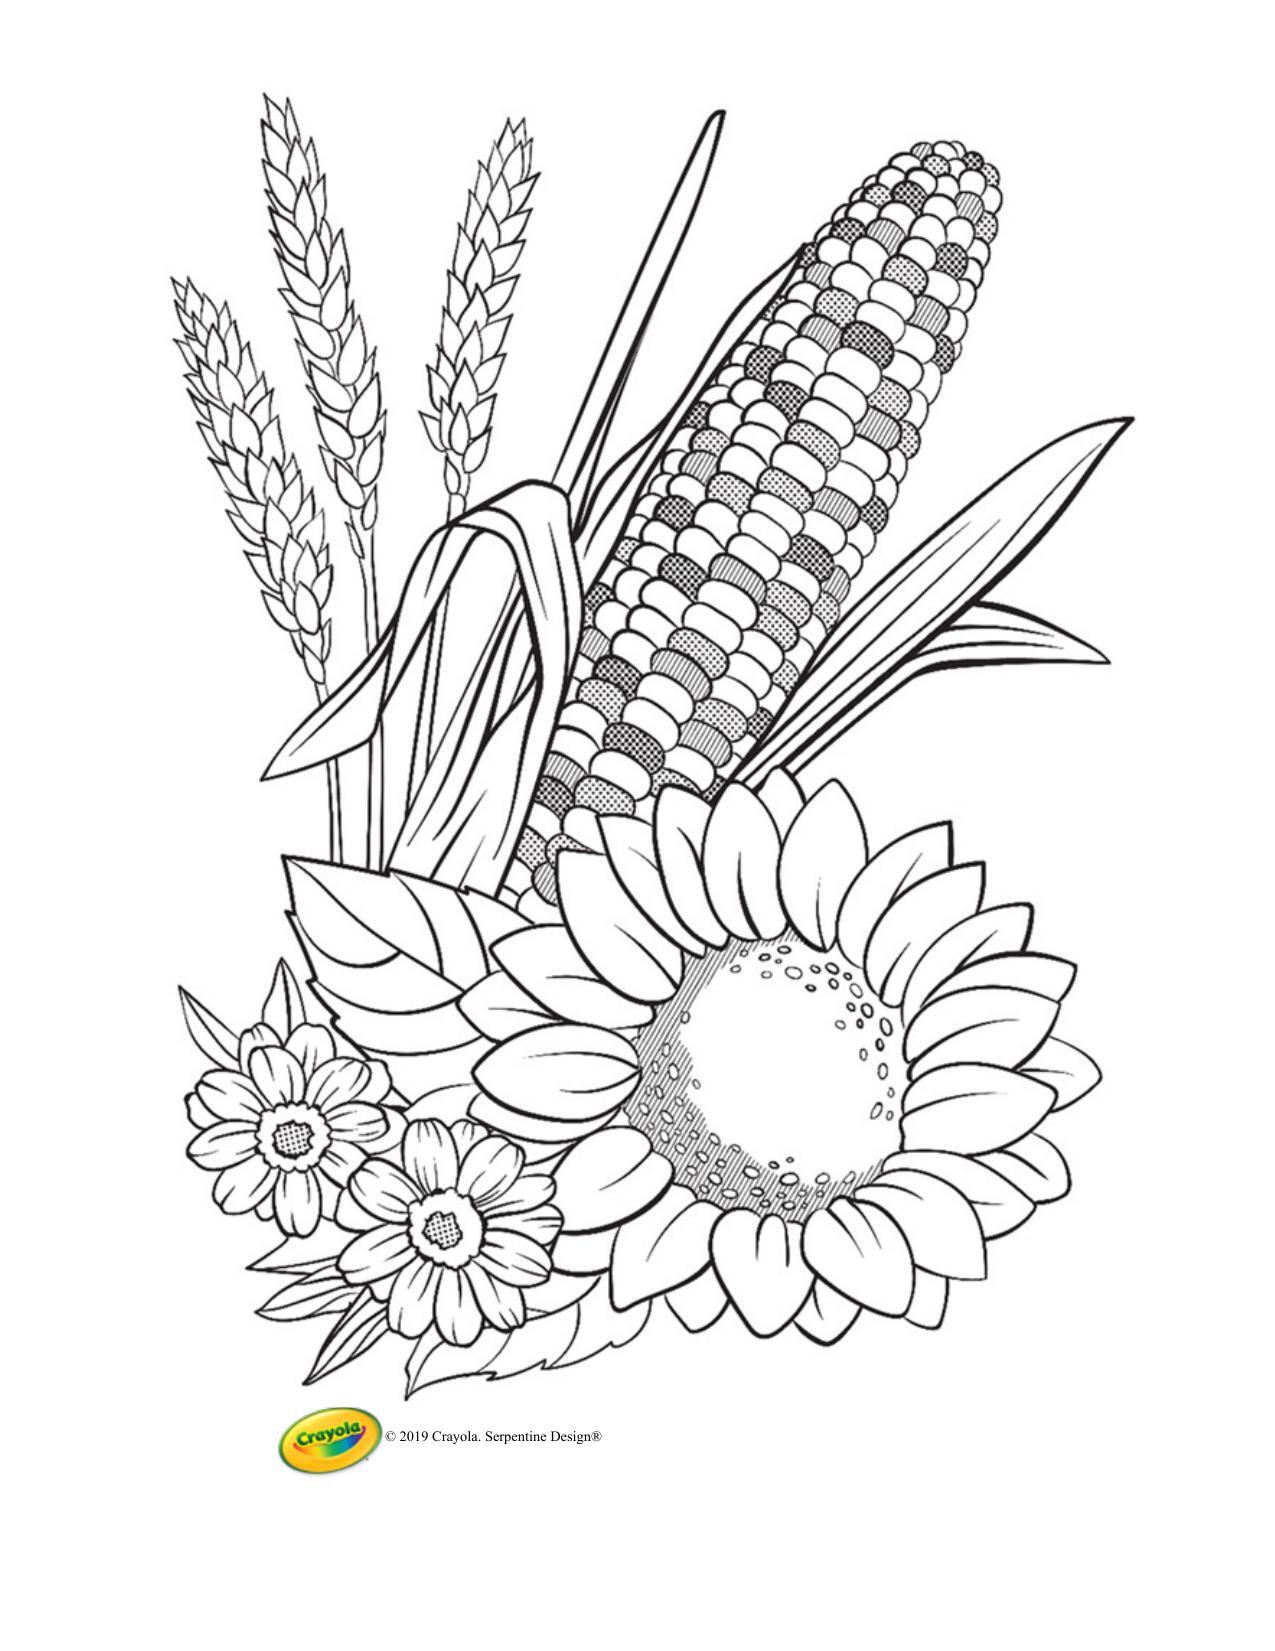 Corn and Flowers